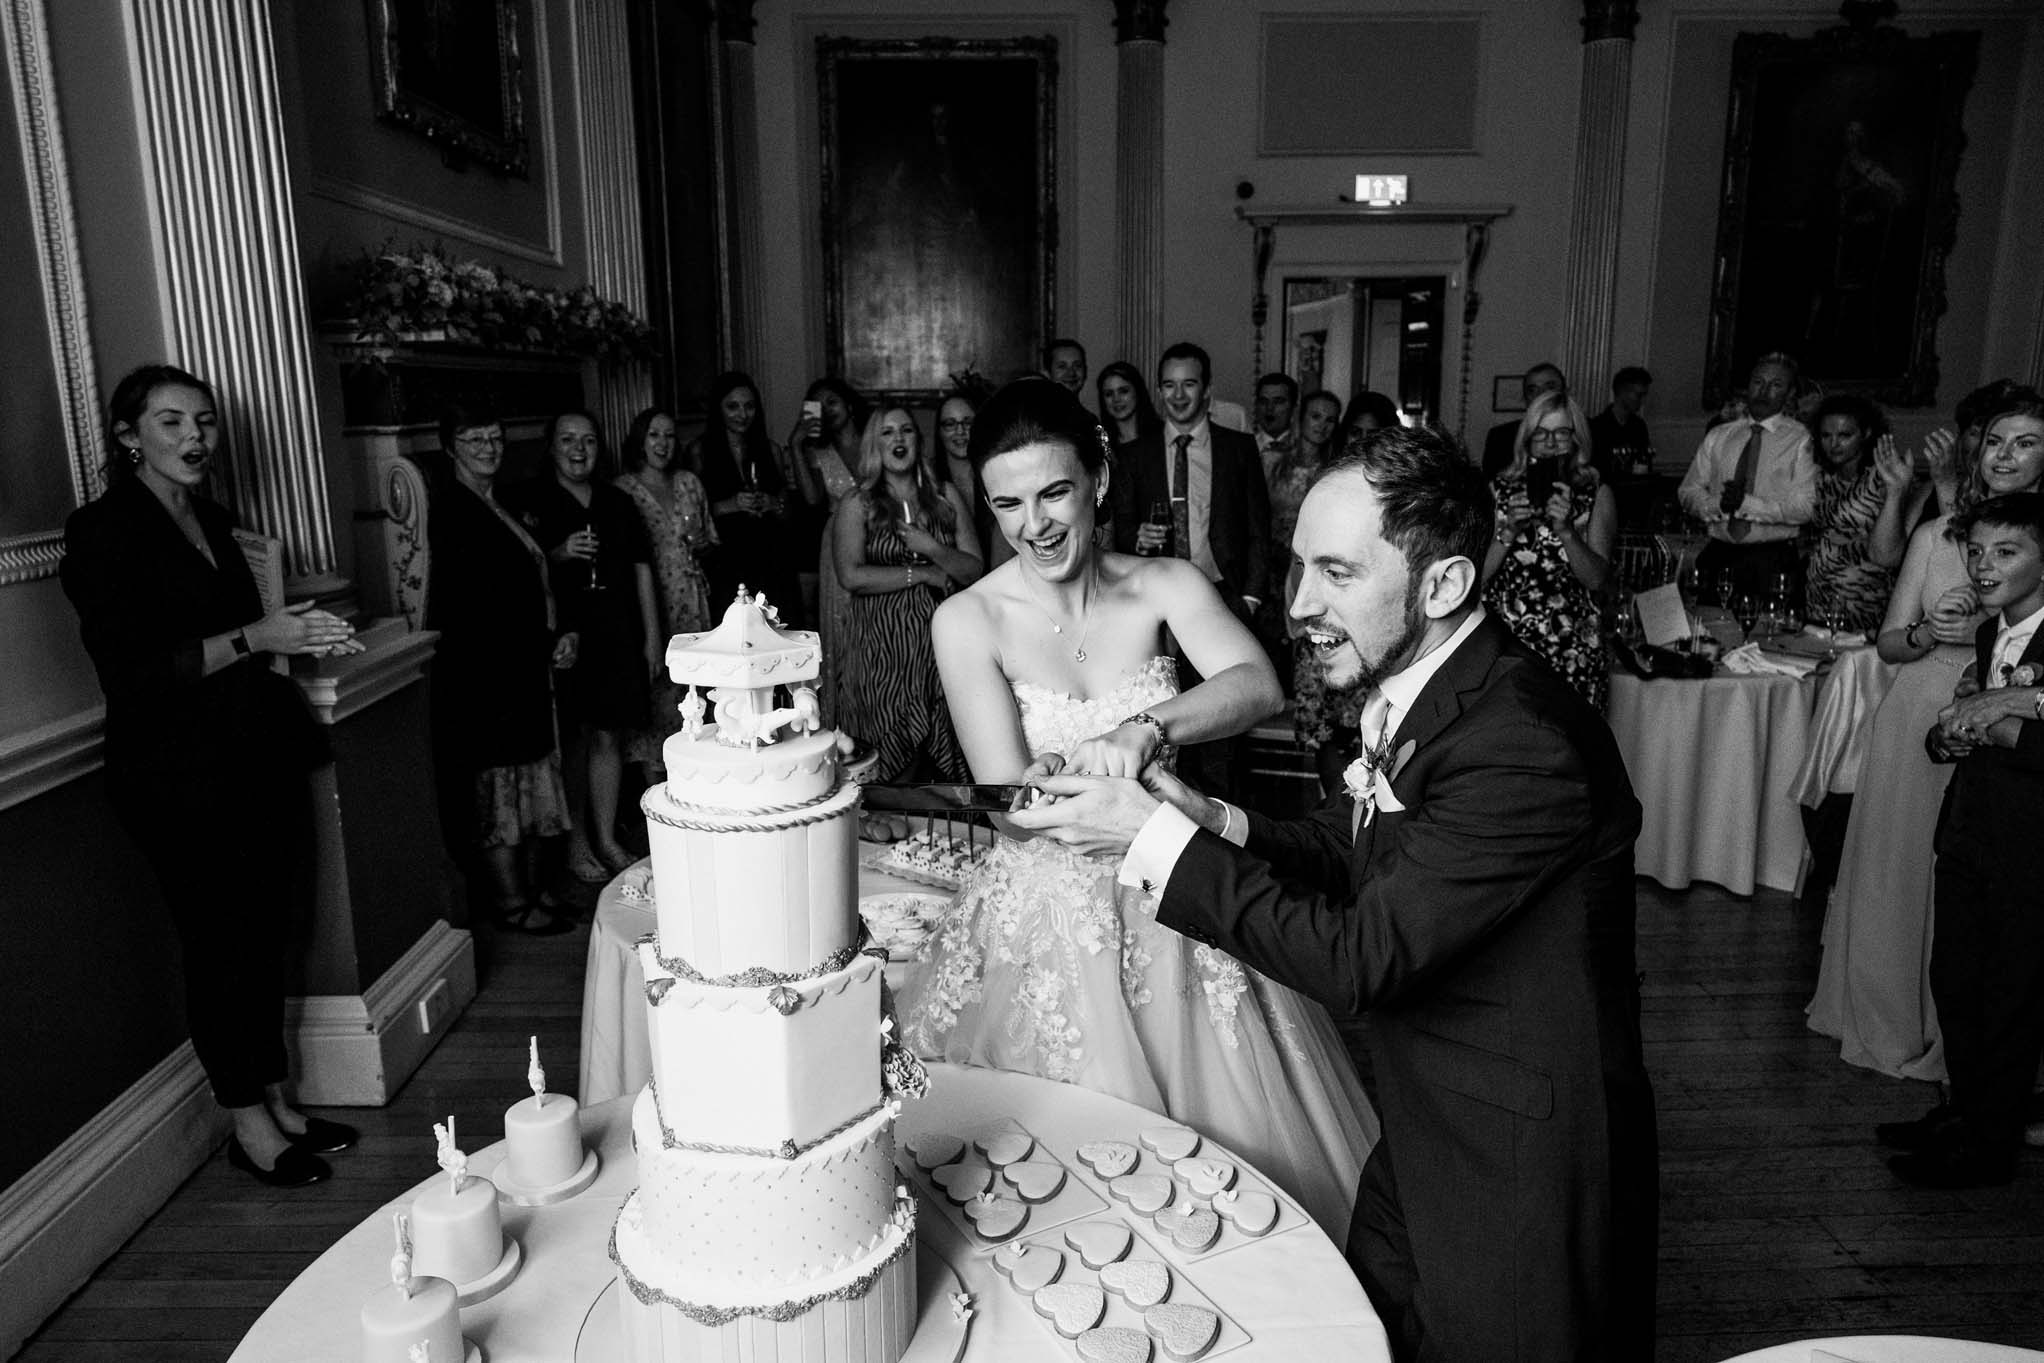 Wedding couple cutting their cake in the Banqueting Room